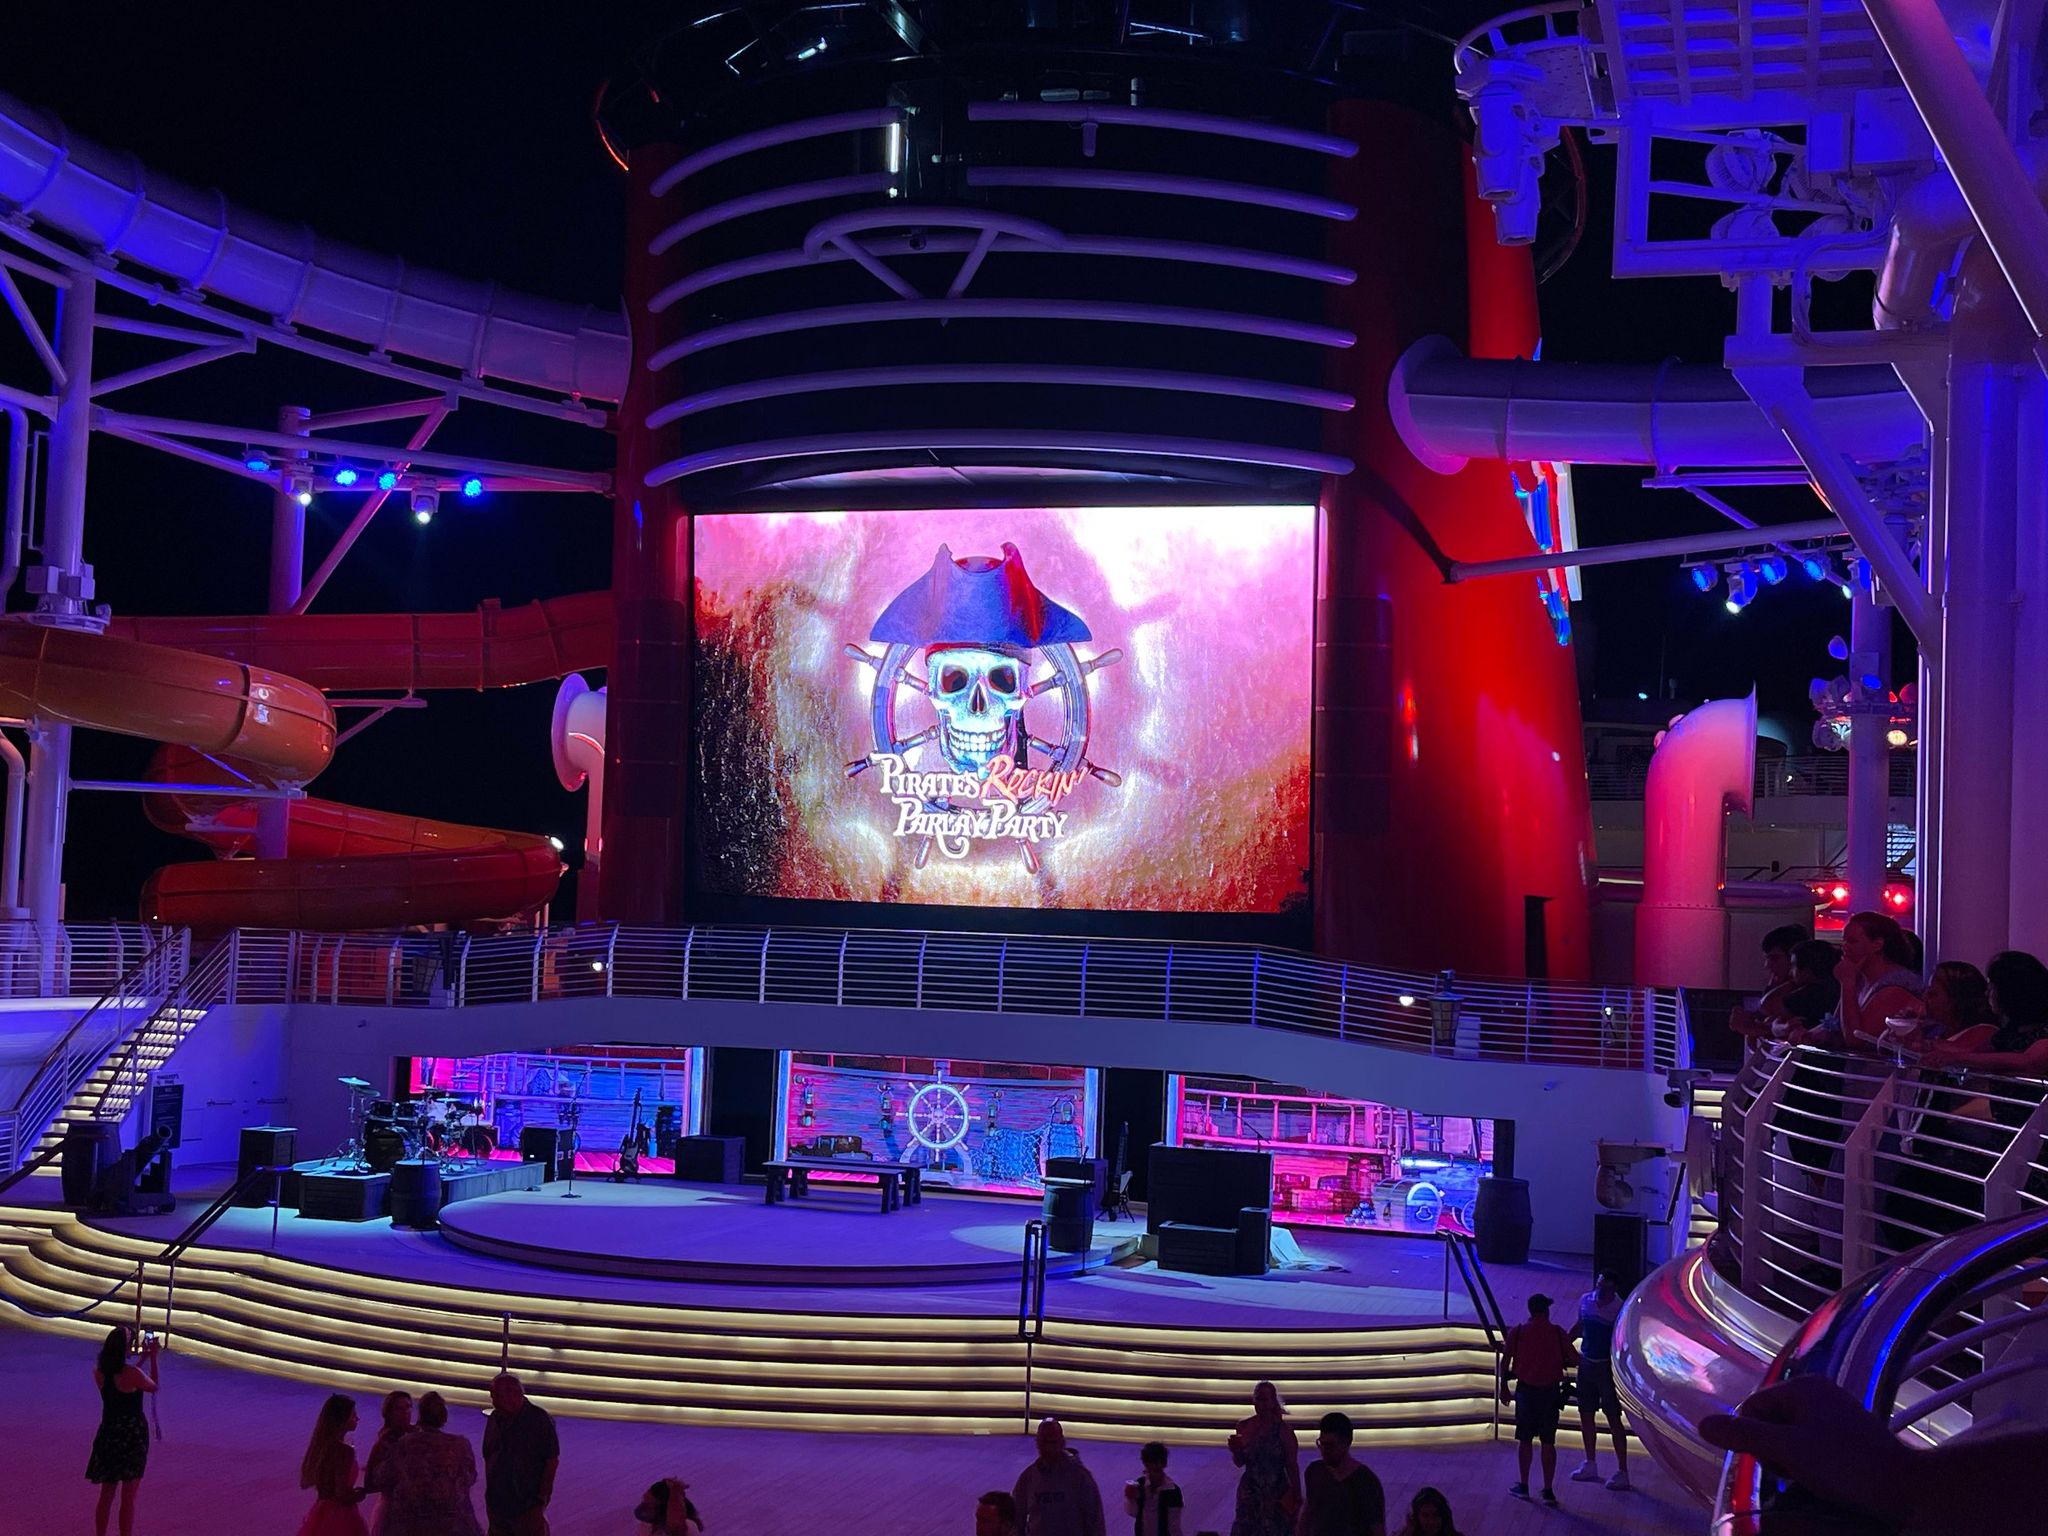 Pirate Night on the Disney Cruise Line – What You Need to Know